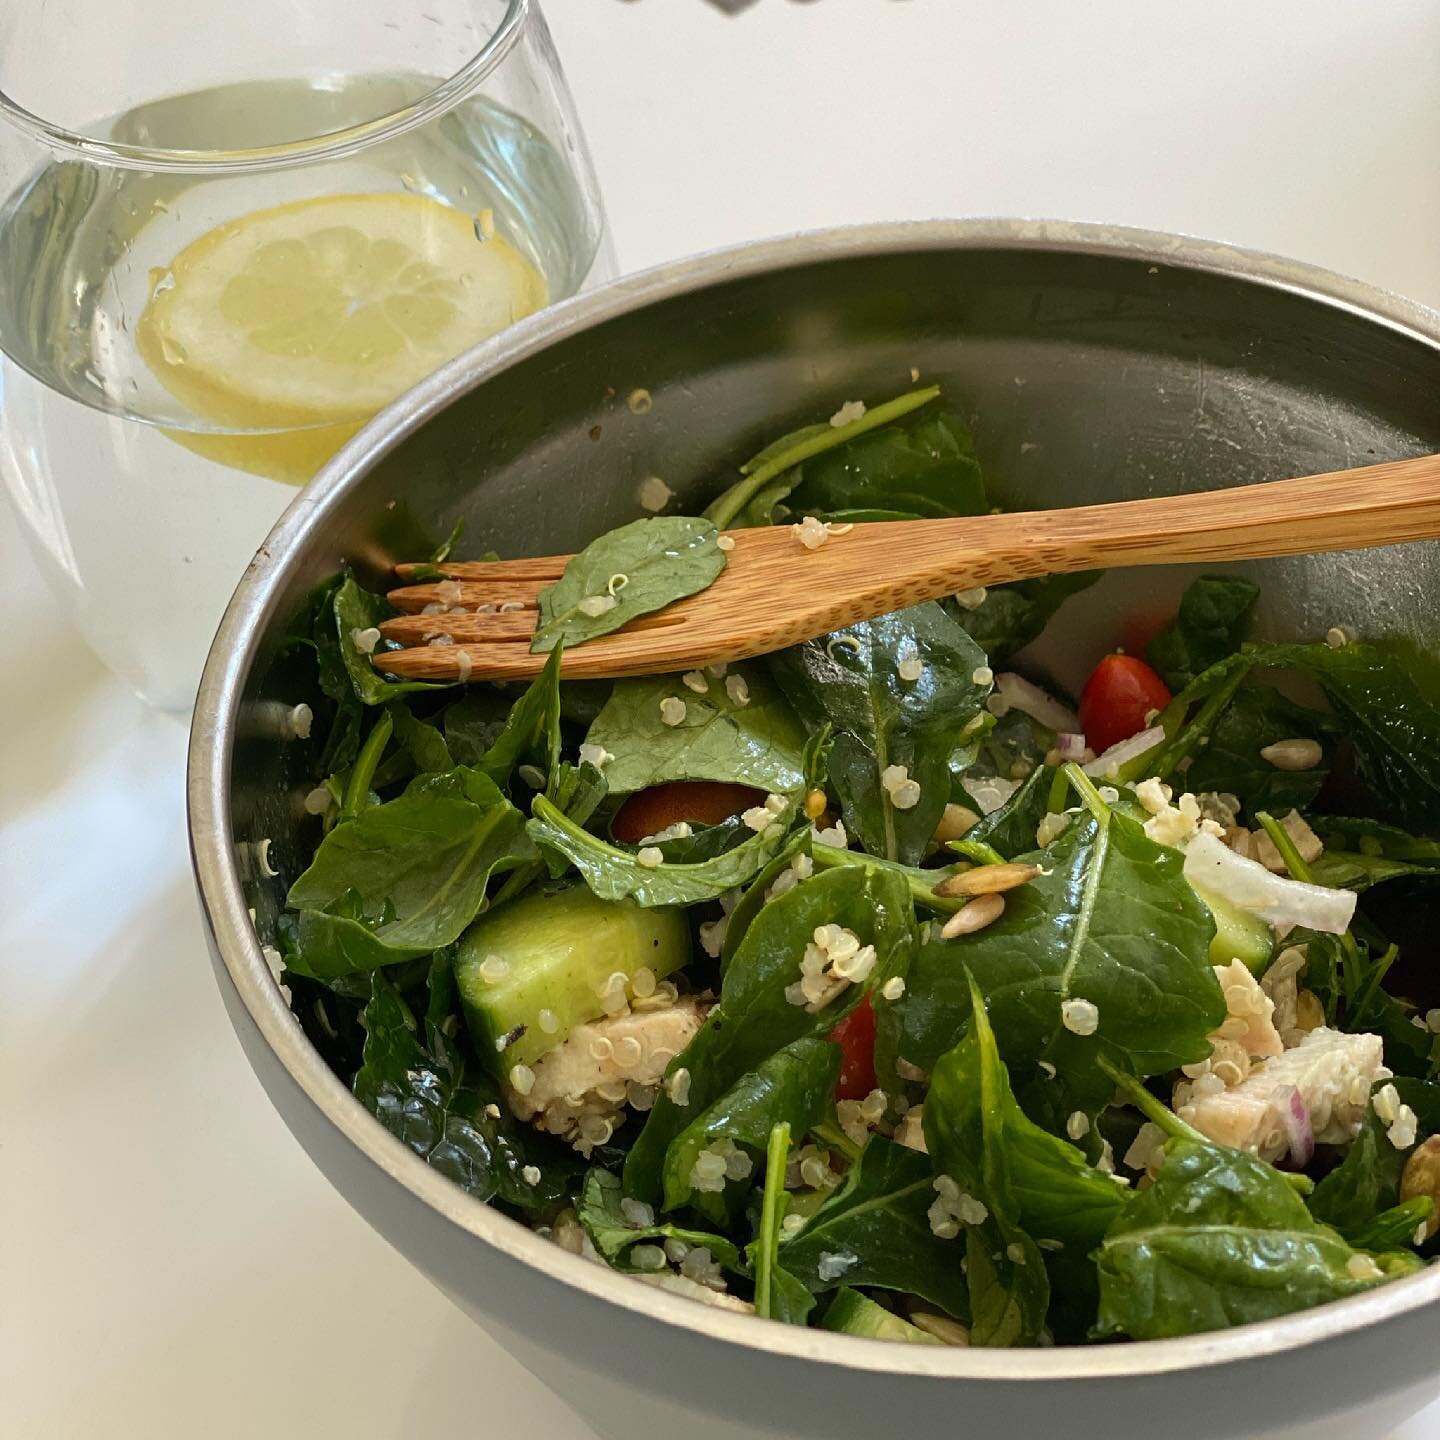 I'm living for these leftover salads I prep in the morning with whatever I have in the fridge. 

This recipe is from my new 6 week program REFINE, LIFT &amp; ALIGN that launched this week. Week 1 is focused on cleansing and clearing. This lovely kale